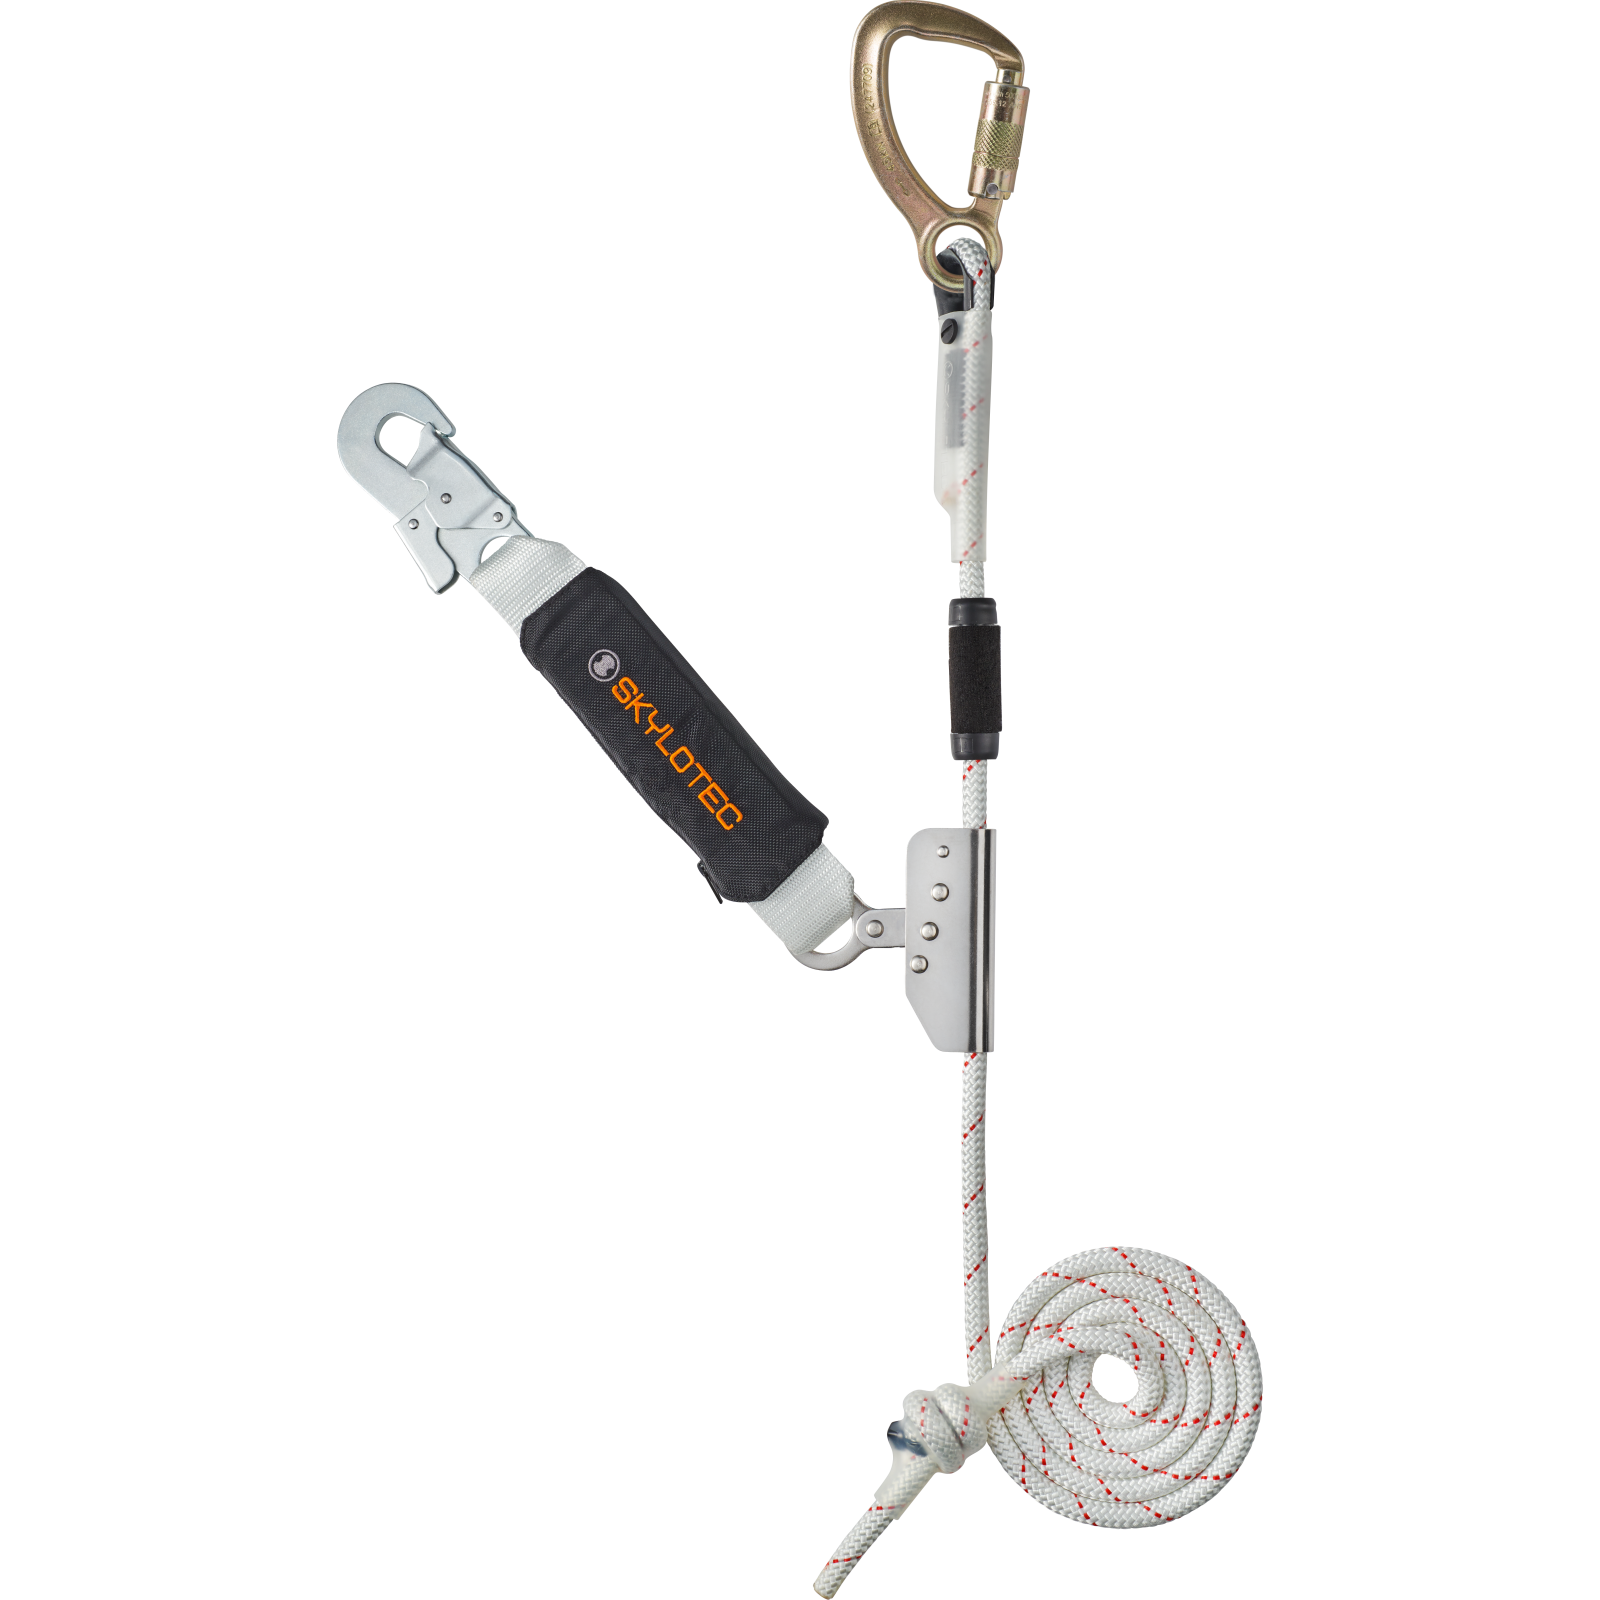 SKN BFD SK11 30m Fall Arrest Device